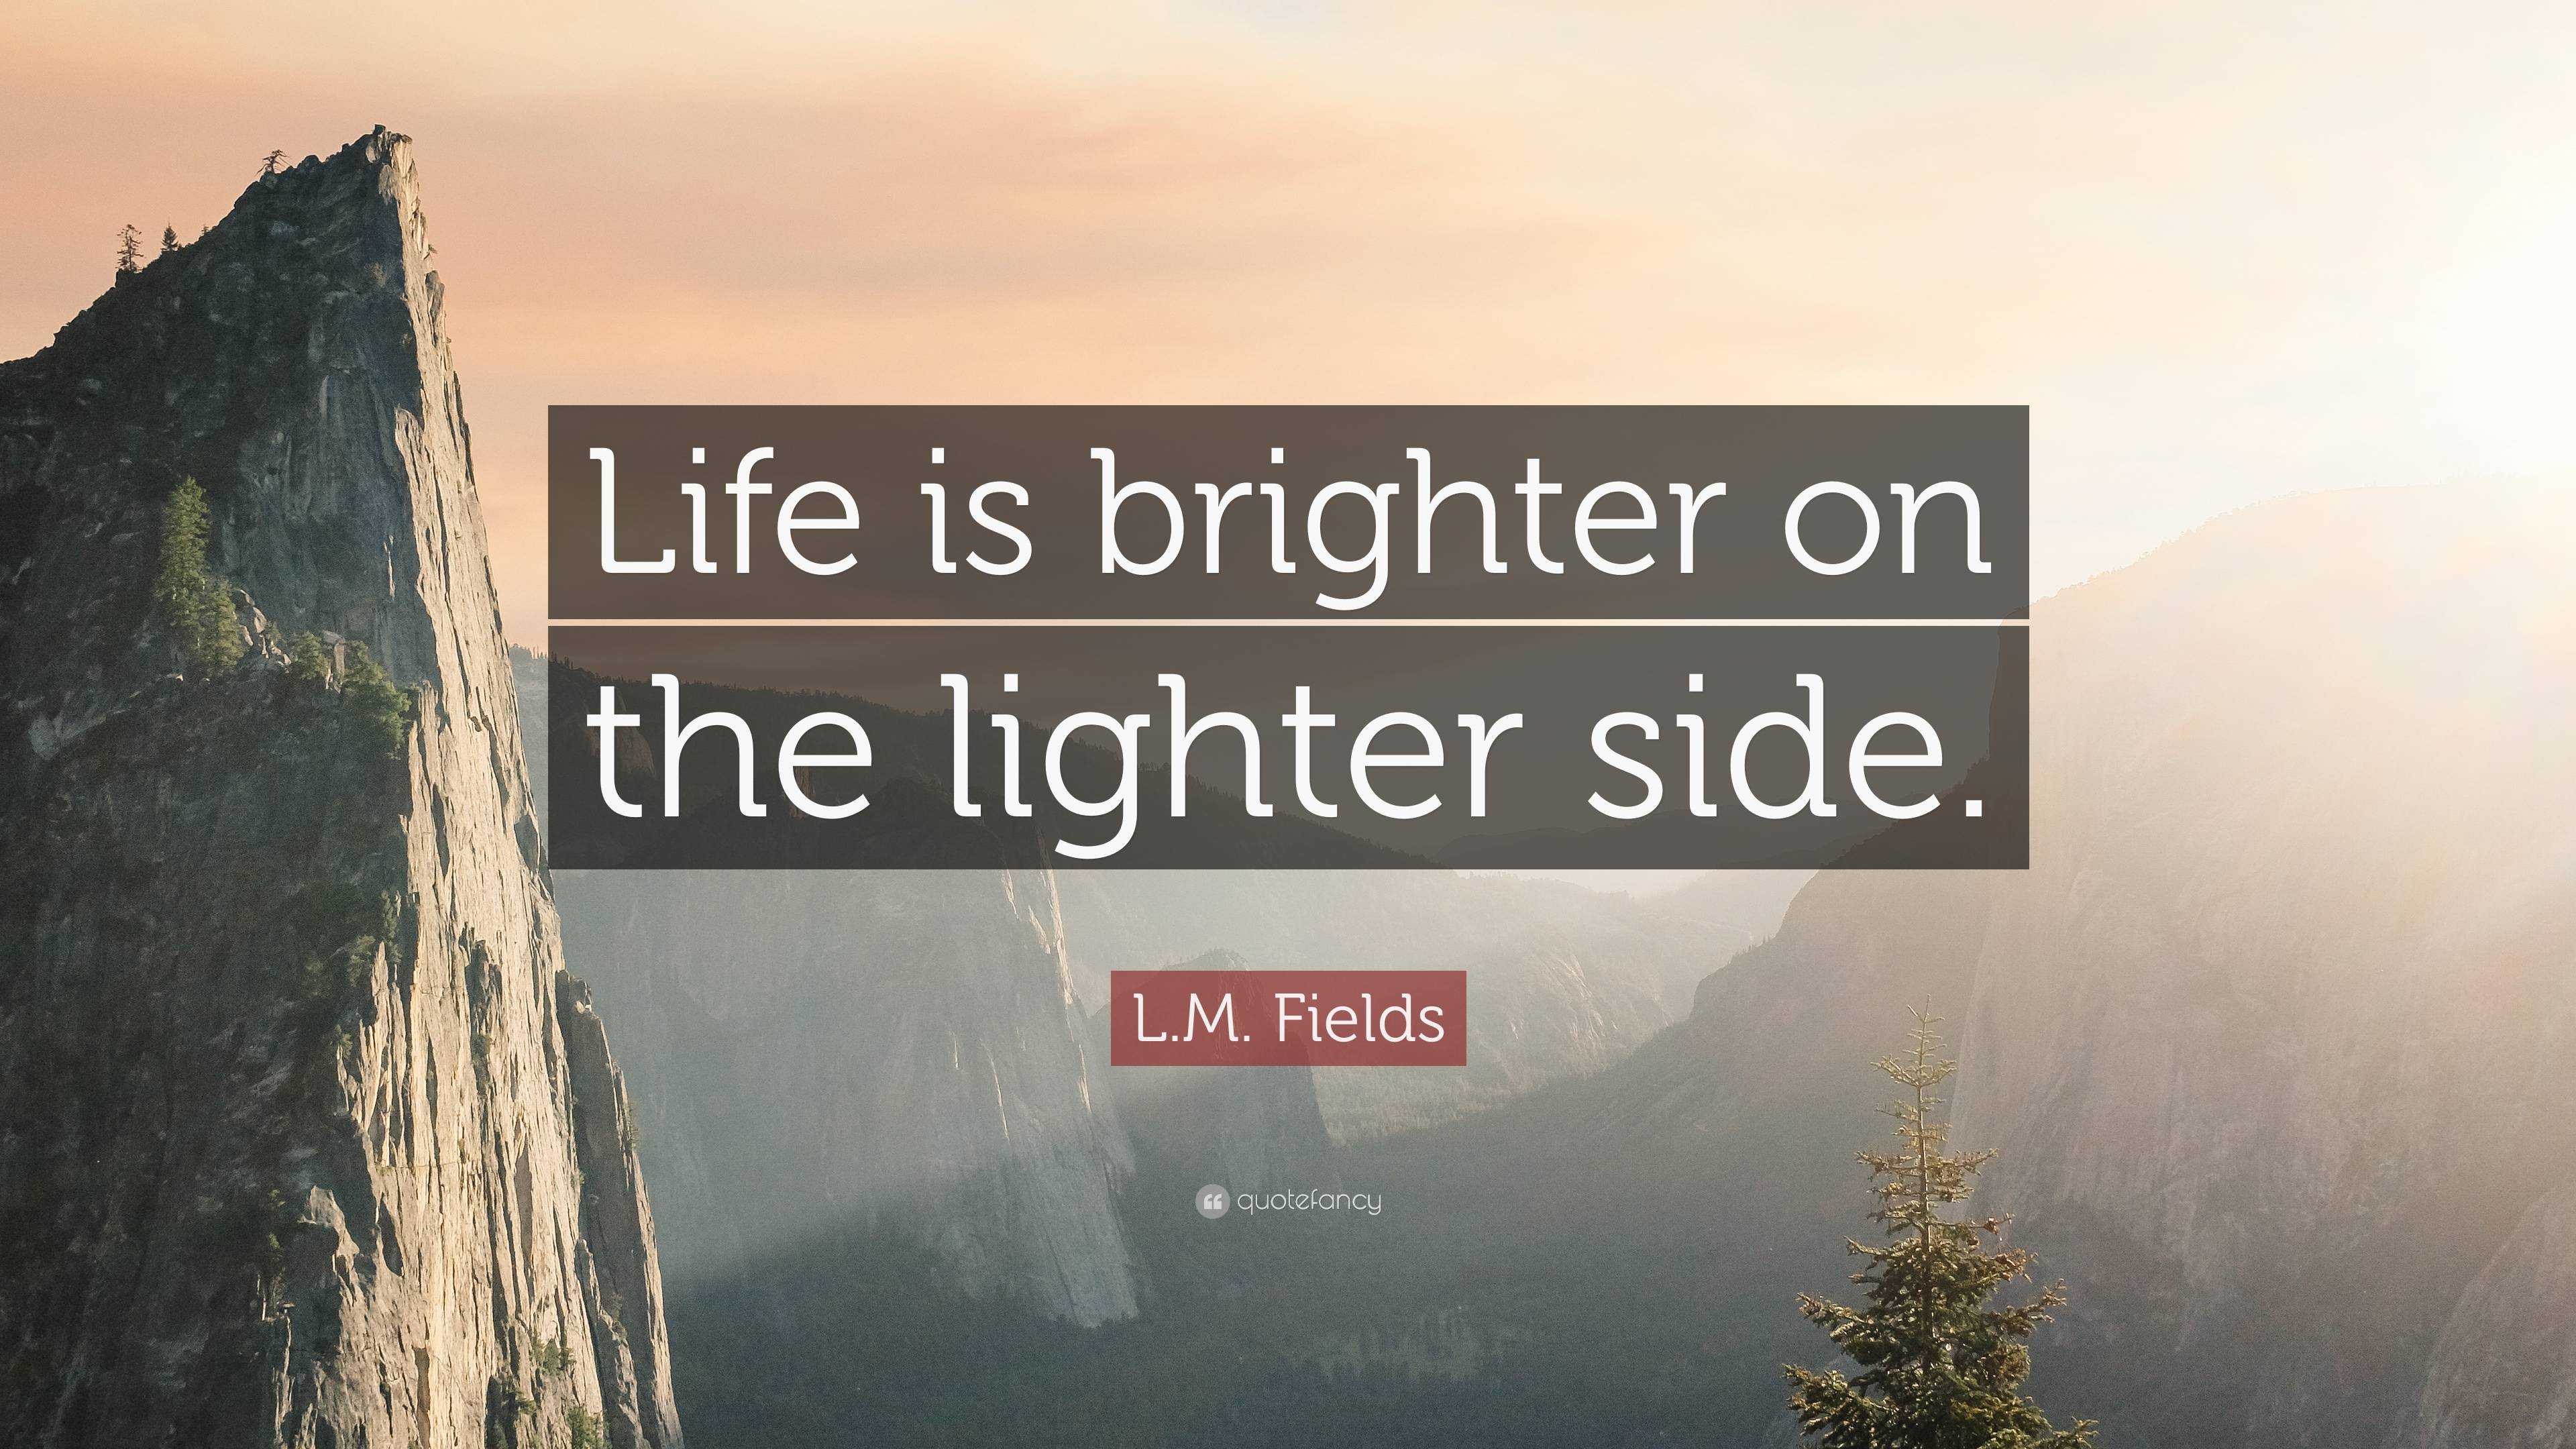 L.M. Fields Quote: “Life is brighter the lighter side.”